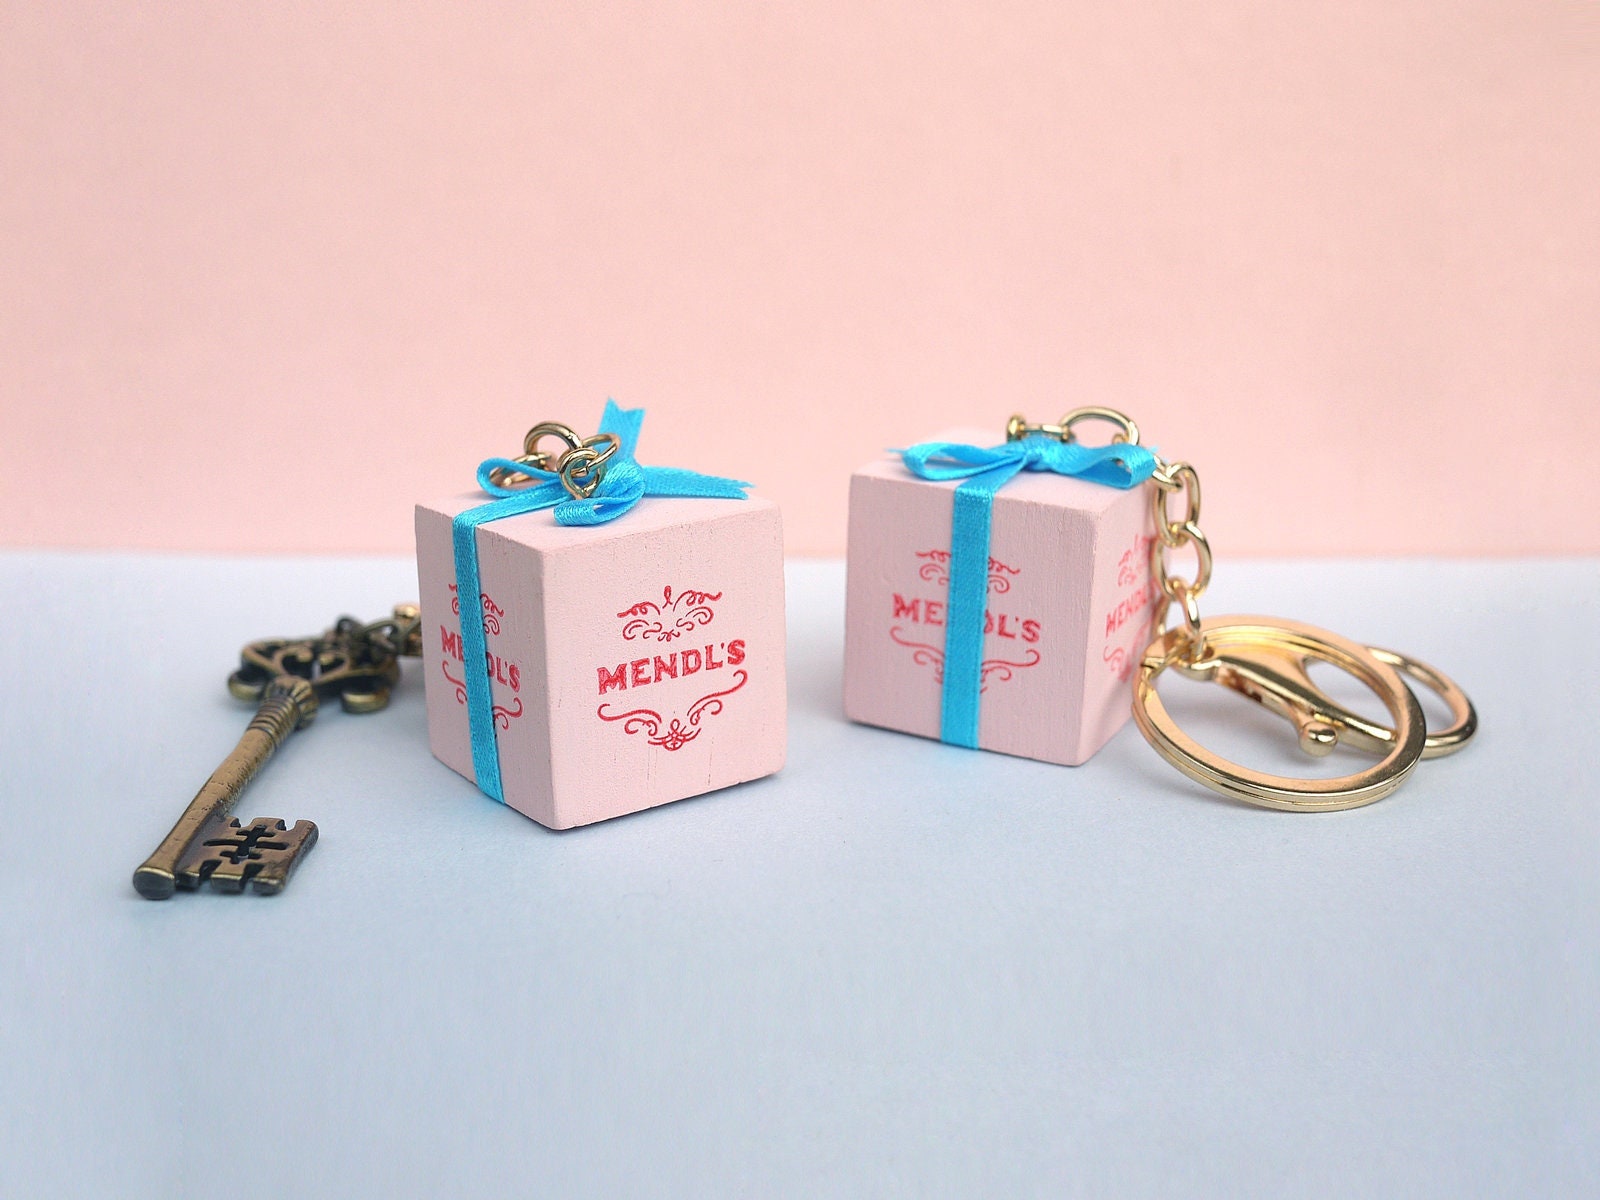 Piscina batería temor Mendl's Box Wooden Keychain Grand Budapest Hotel Wes - Etsy